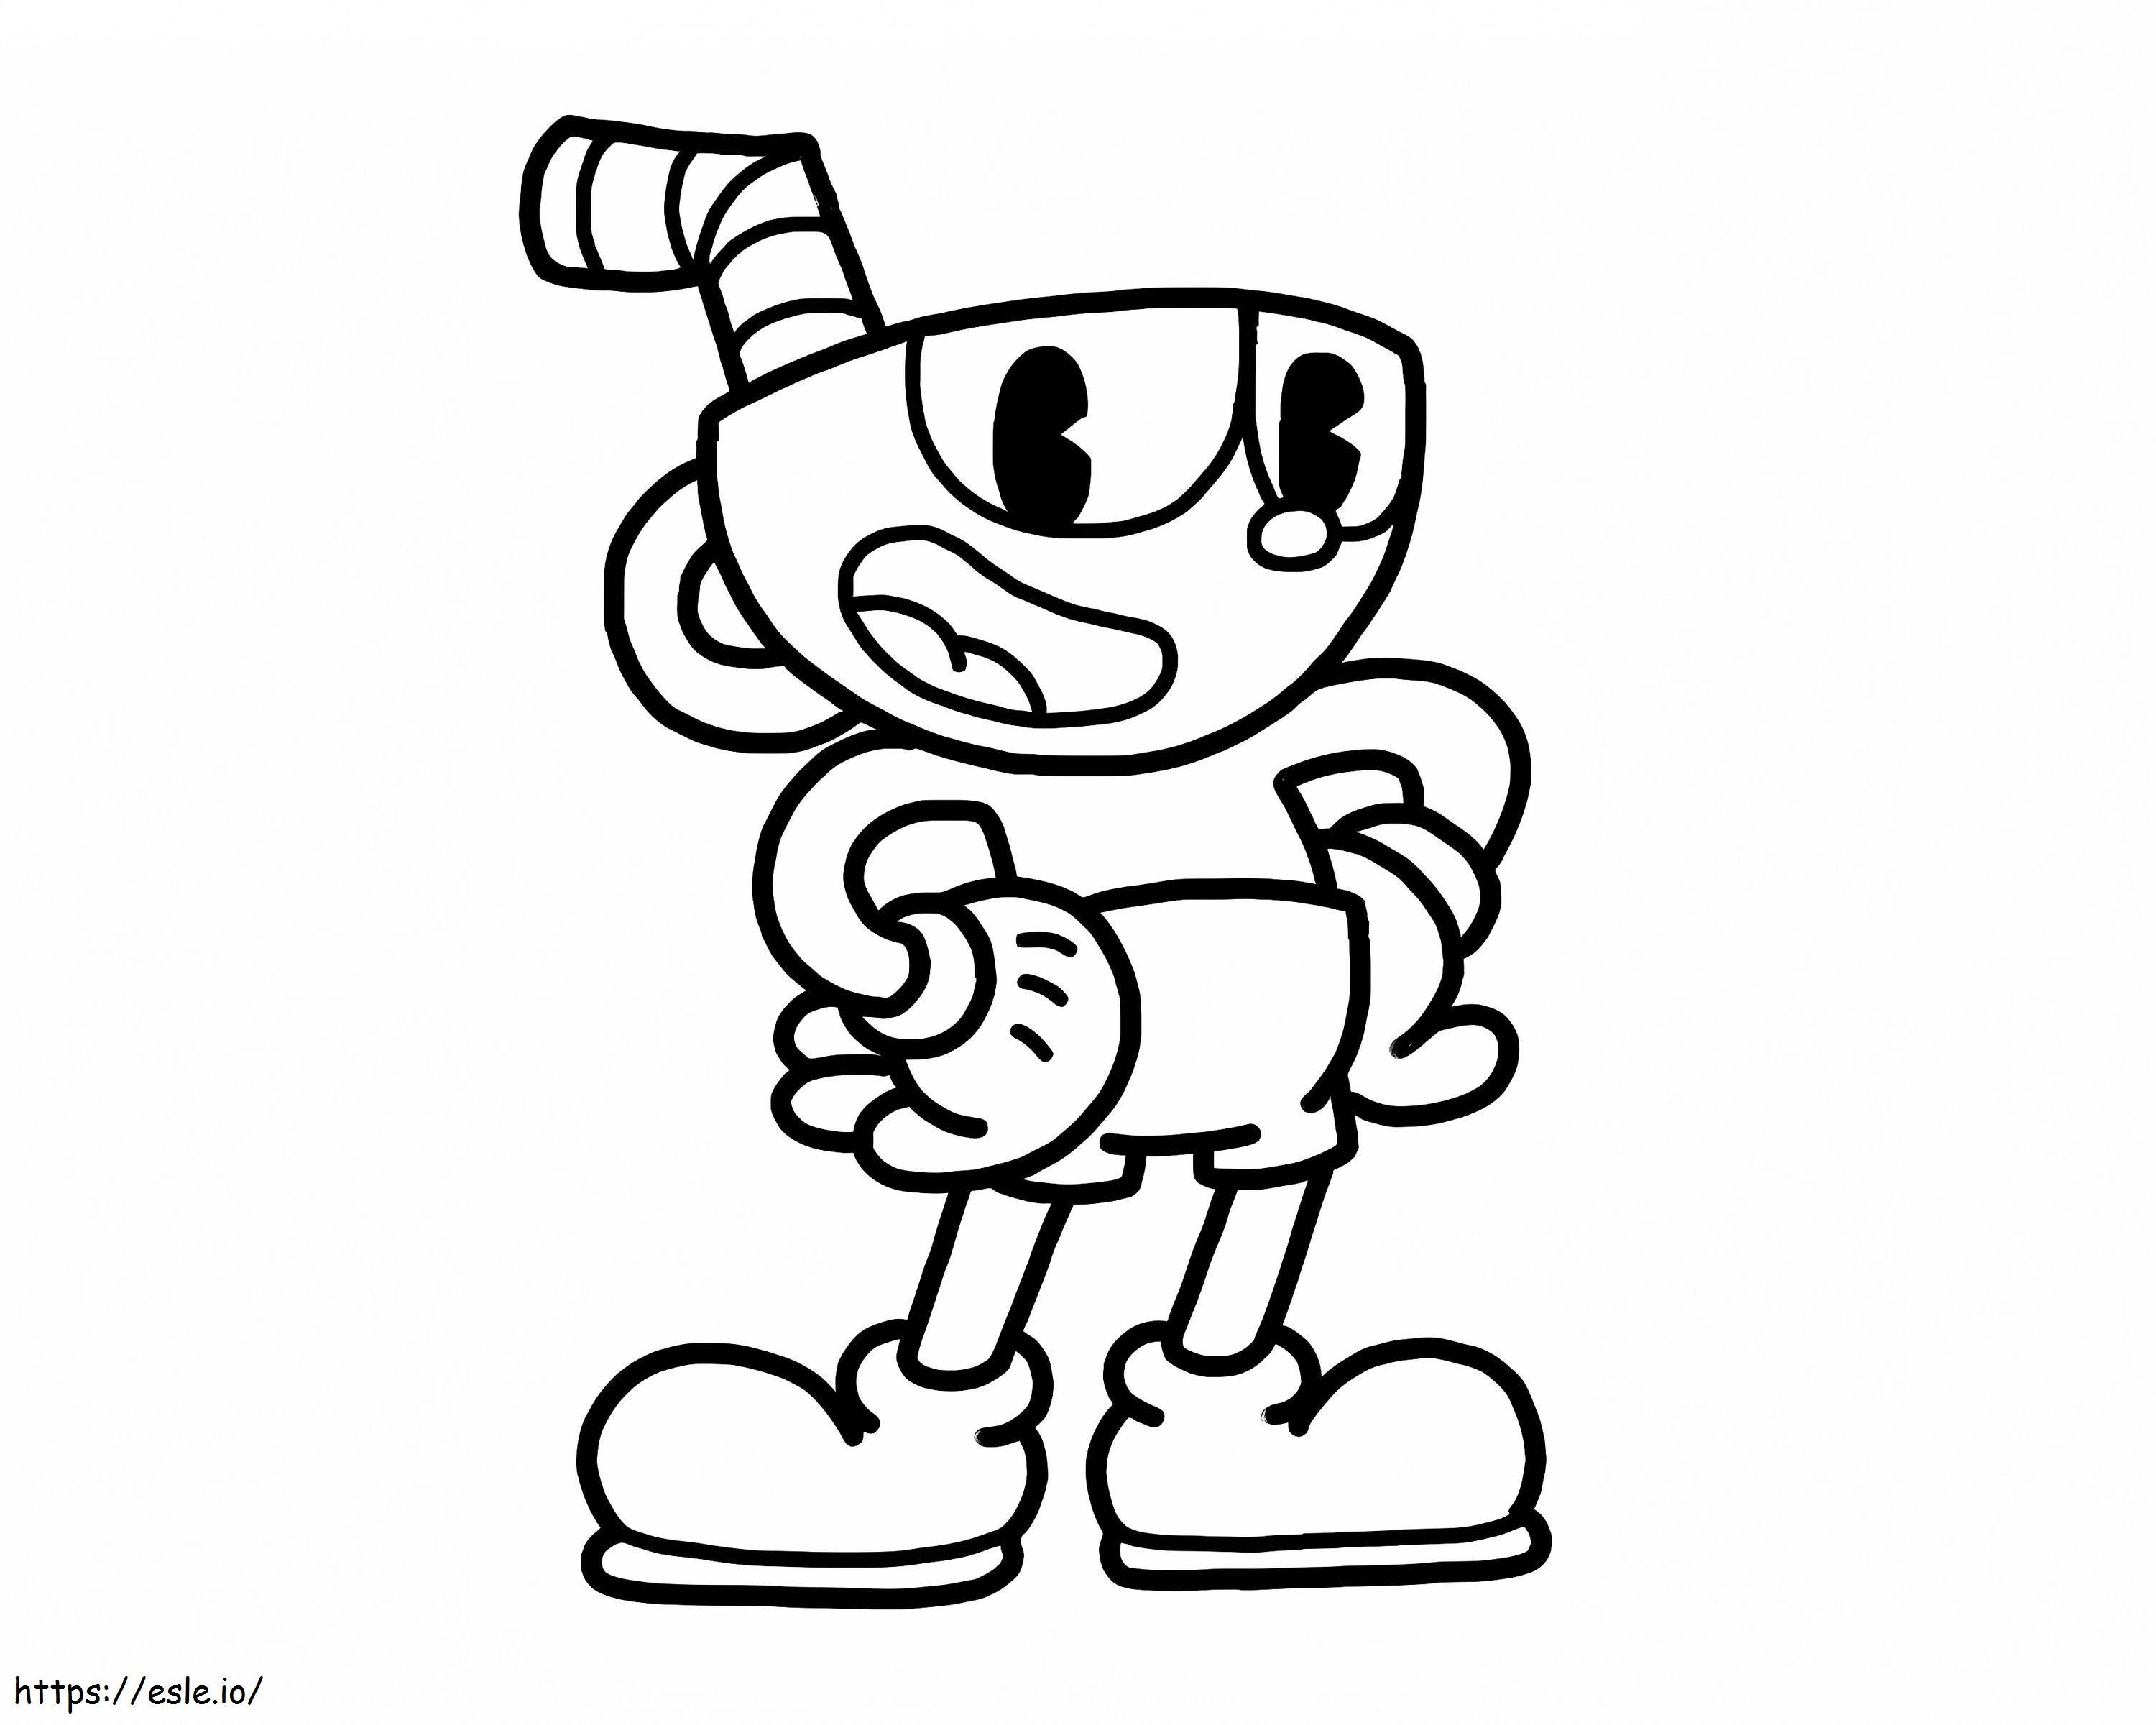 Cuphead 2 coloring page